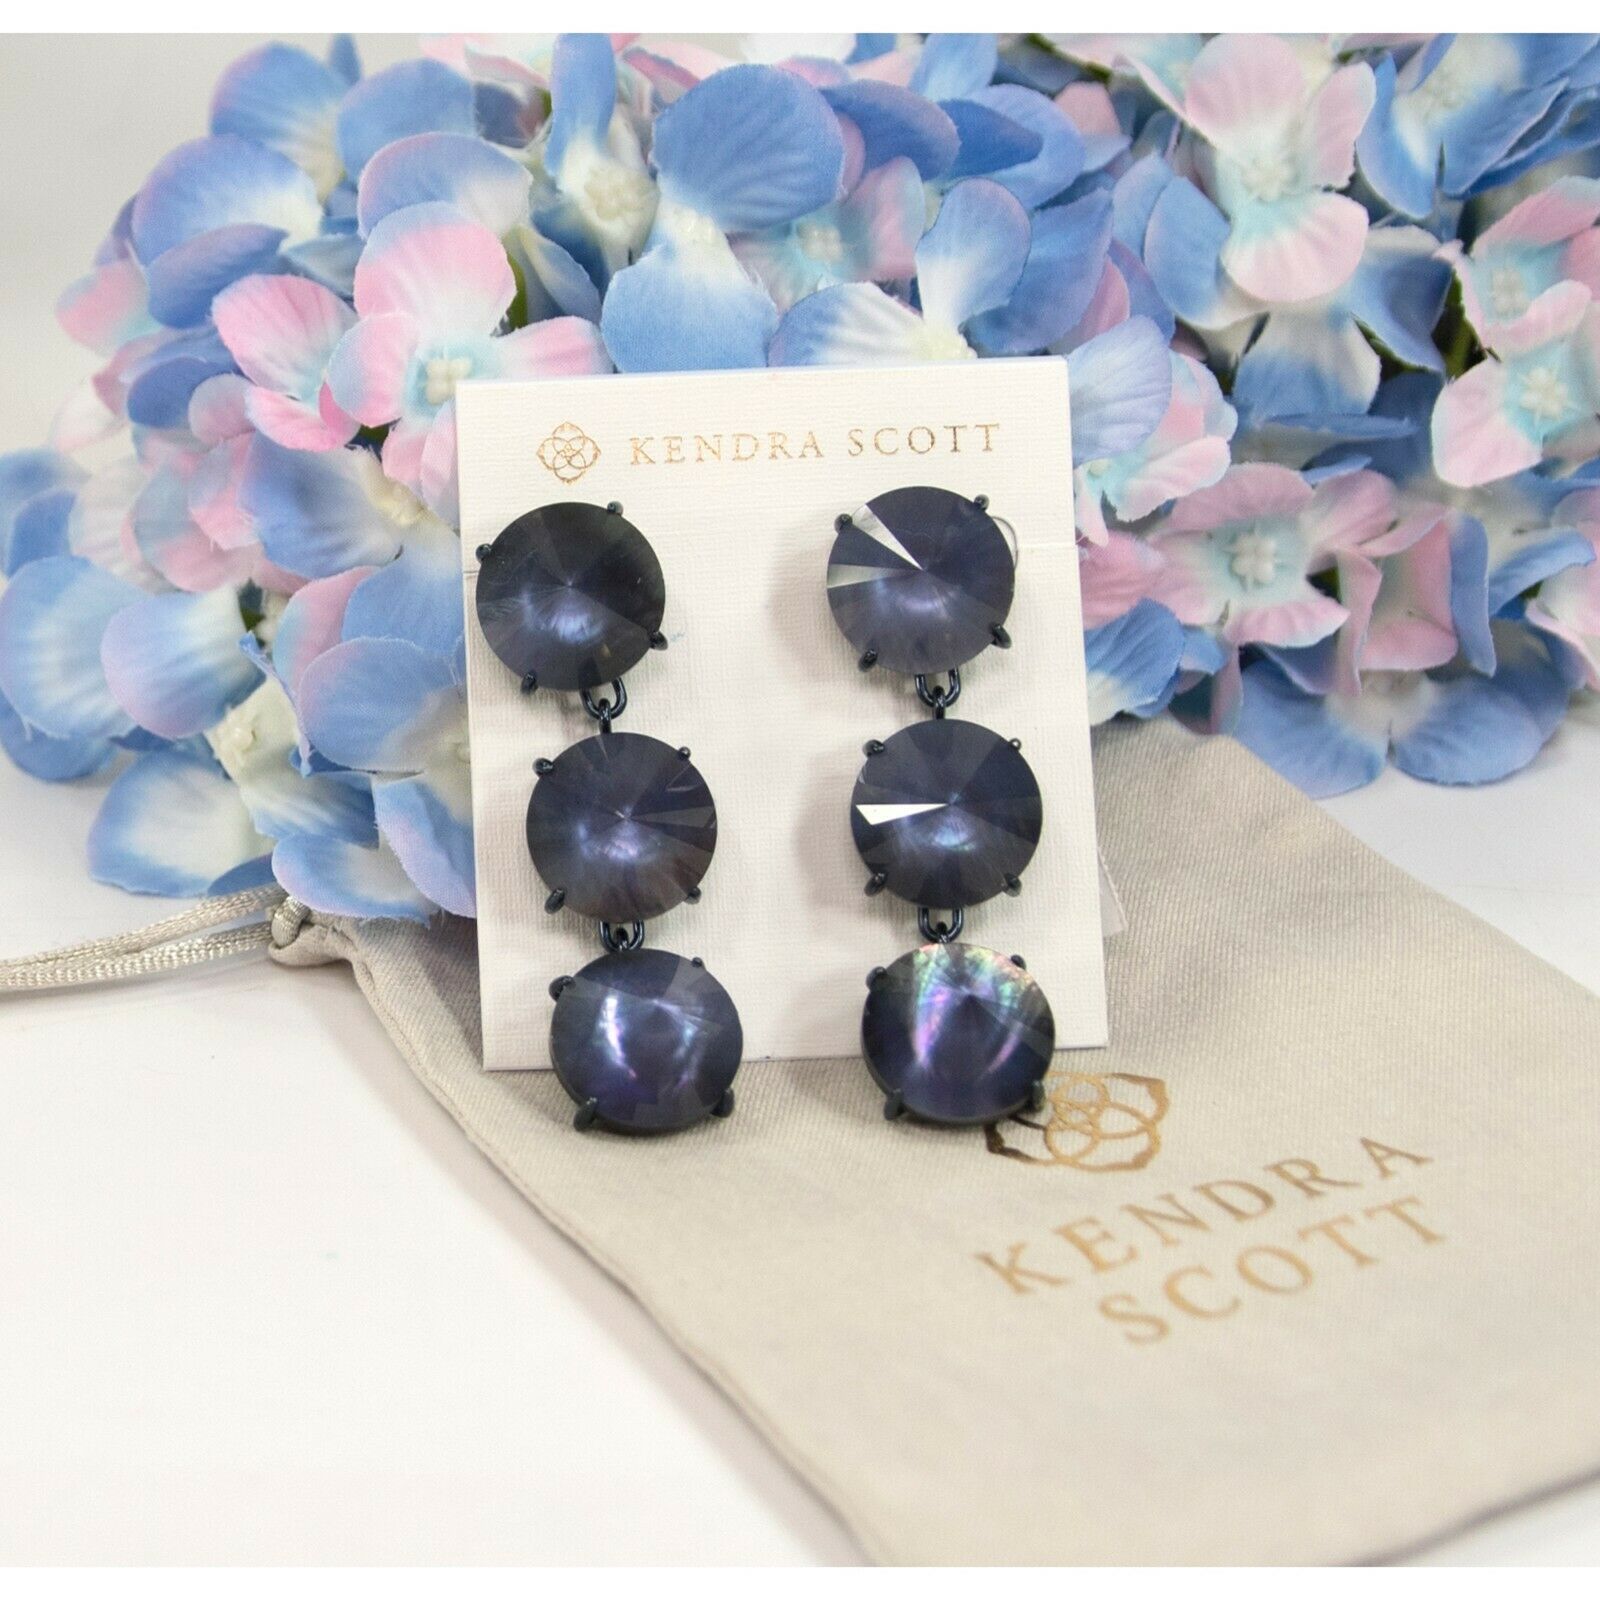 Primary image for Kendra Scott Jolie Linear Navy Black Mother of Pearl Drop Dangle Earrings NWT